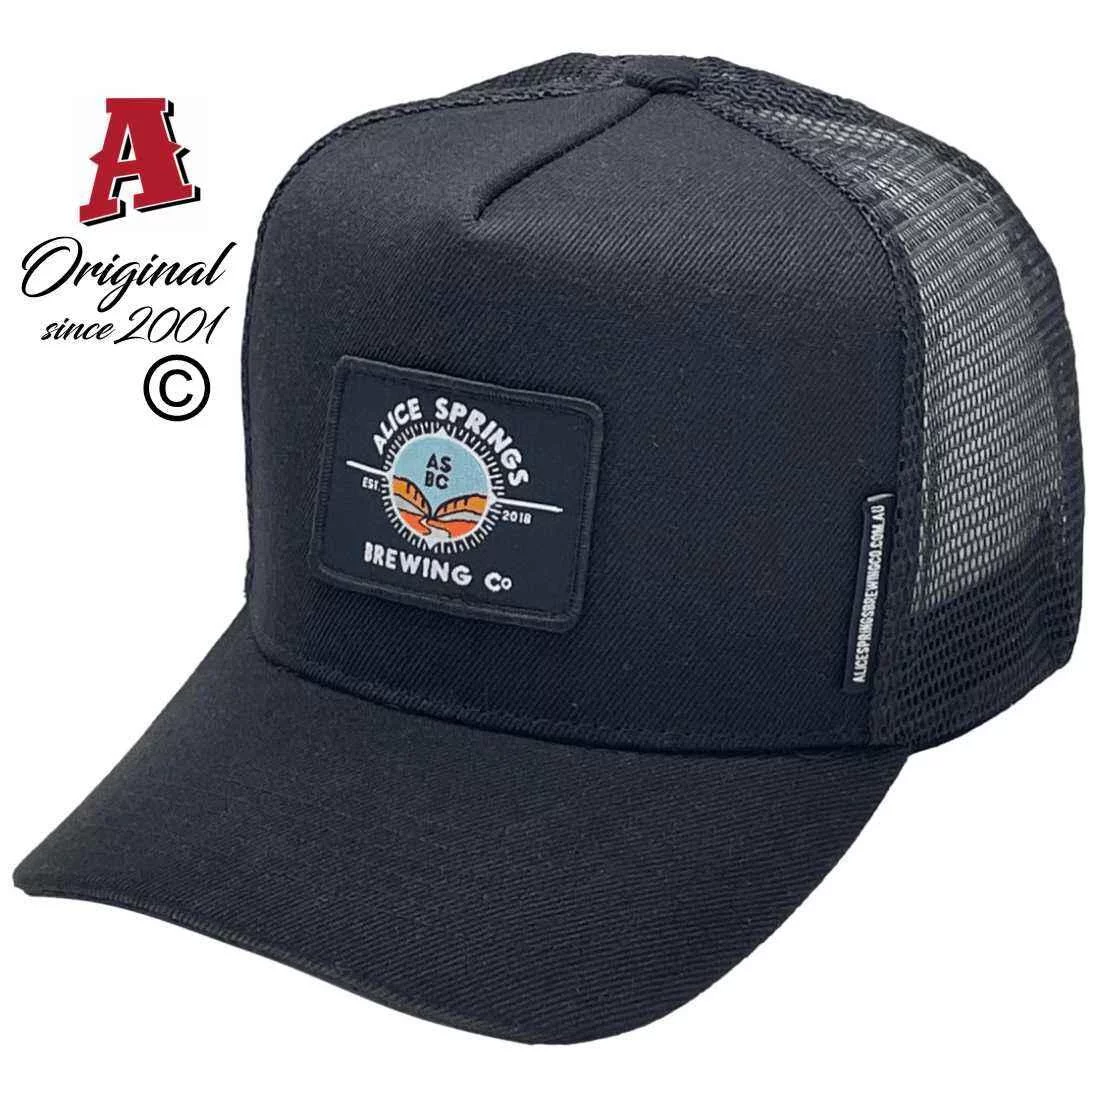 Alice Springs Brewing Co Alice Springs NT Basic Aussie Trucker Hats with Australian HeadFit Crown and Woven Label black Snapback